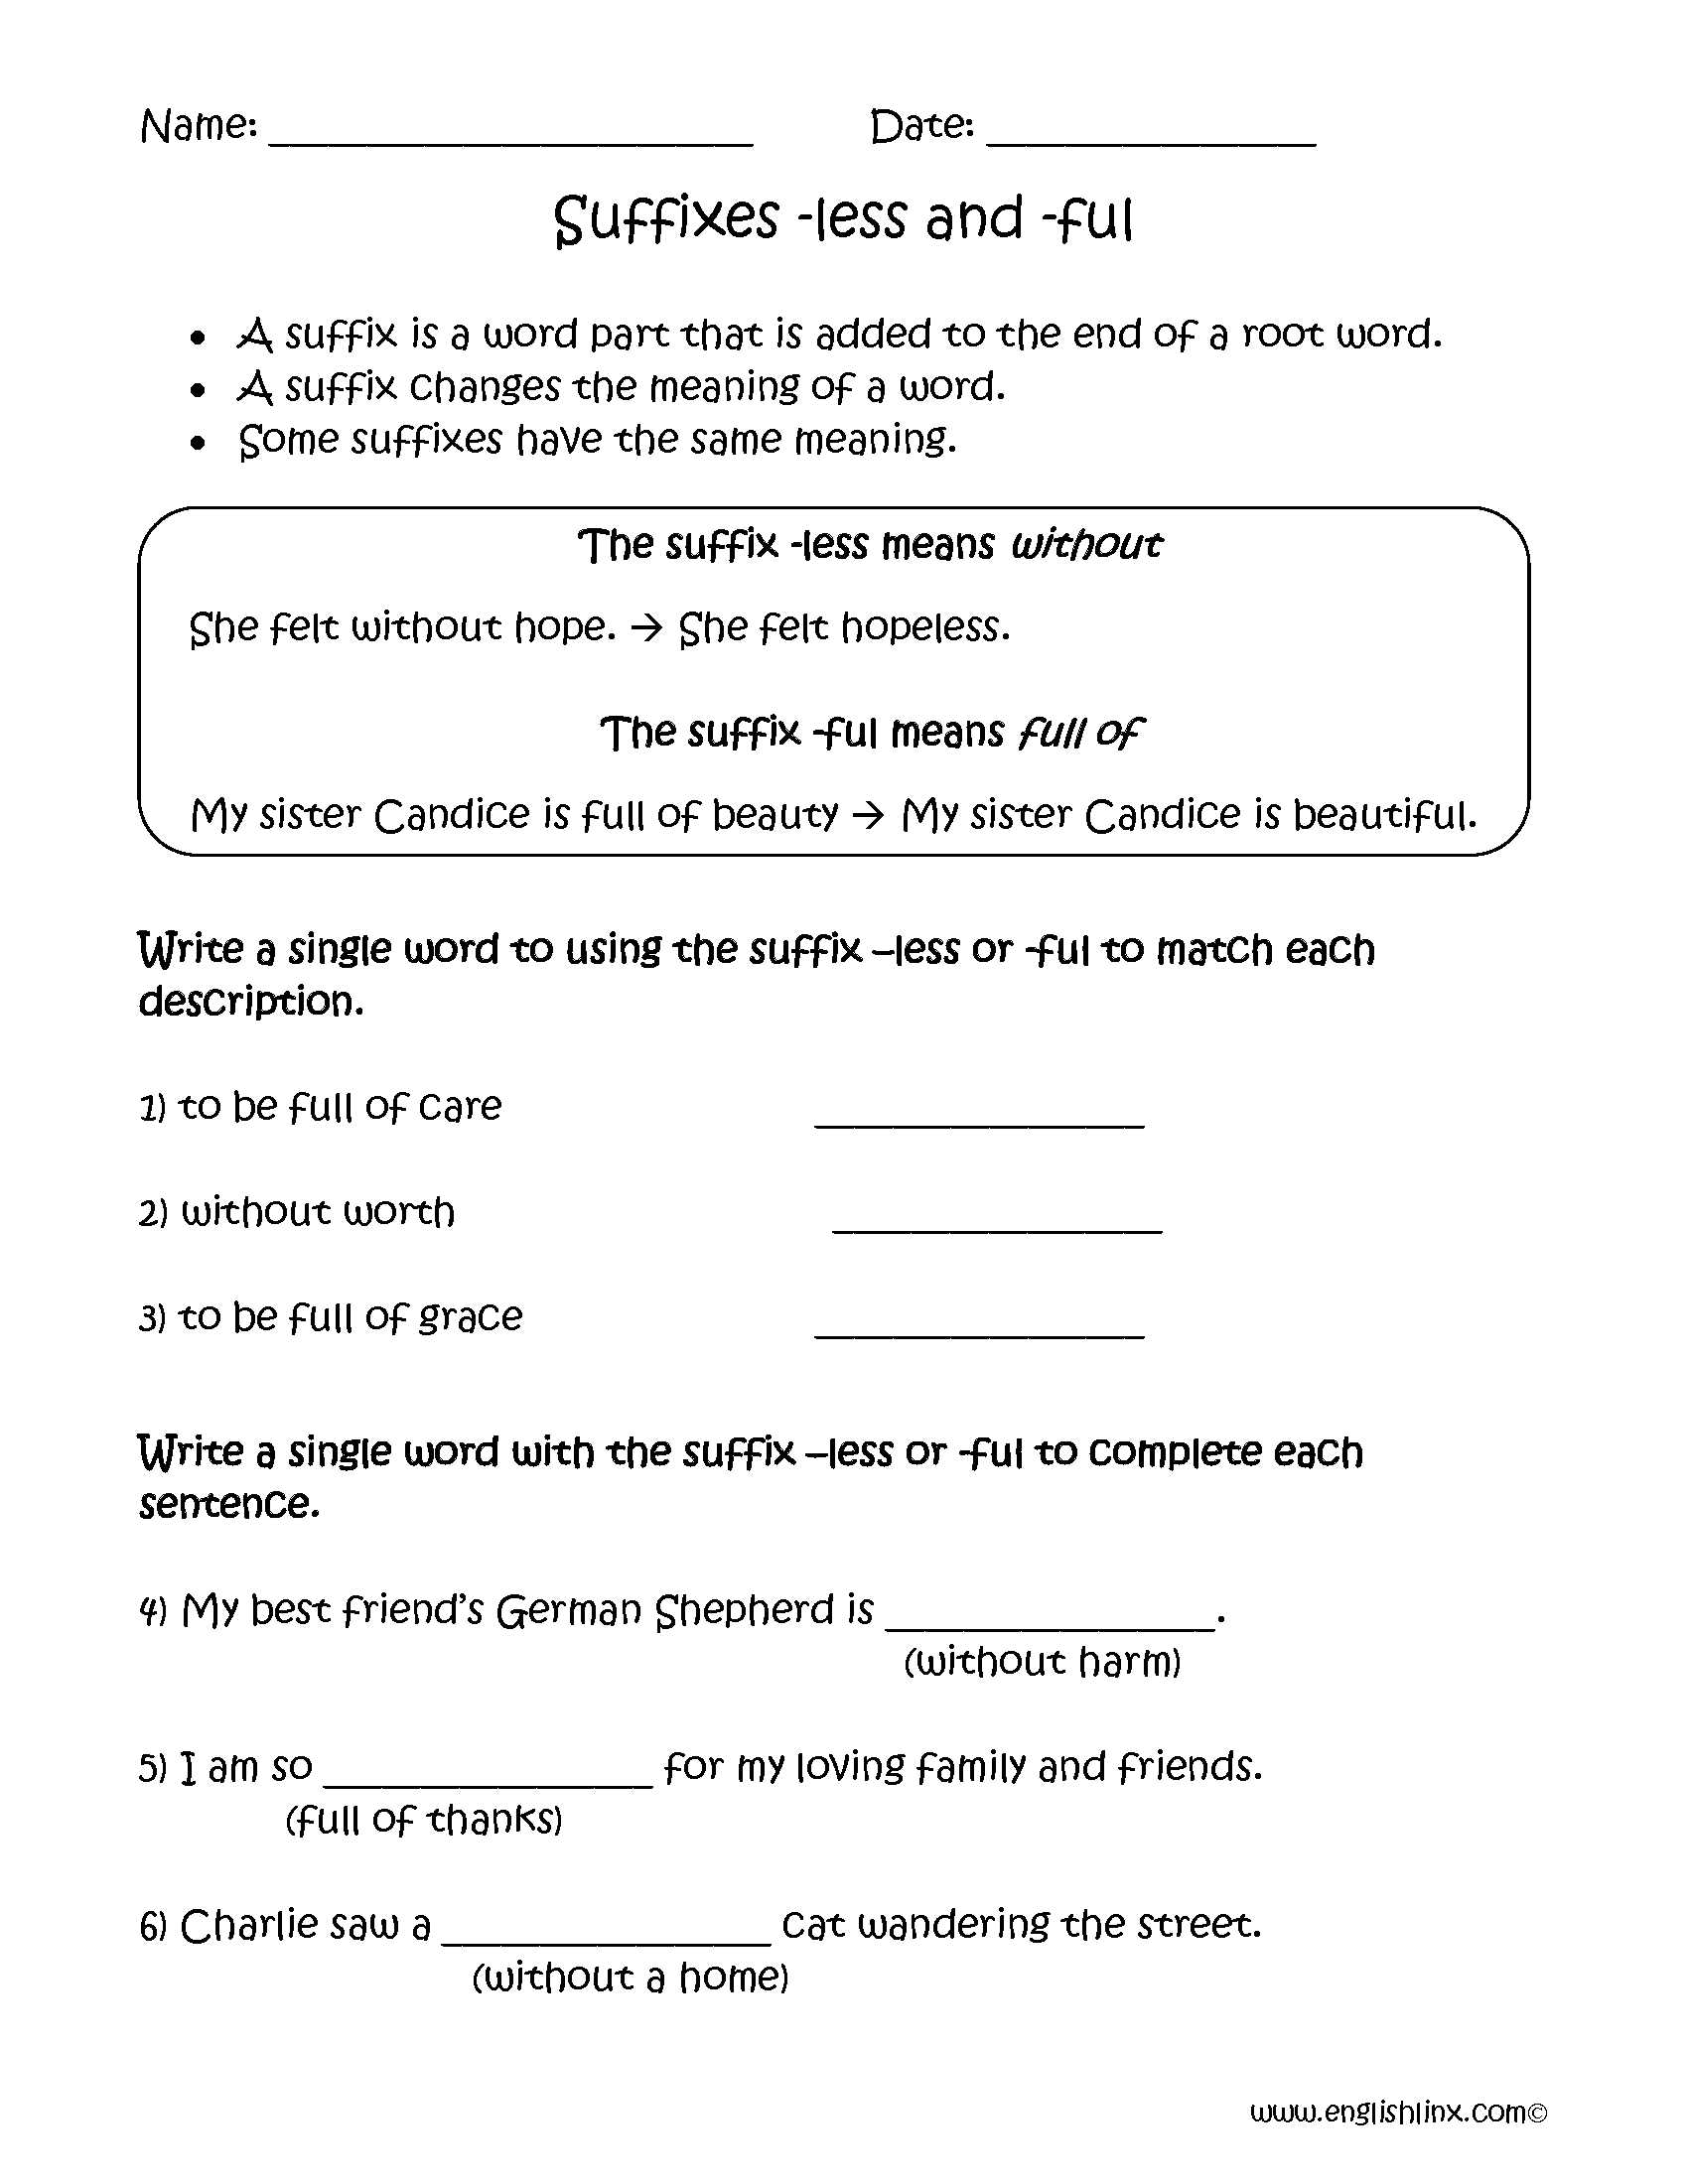 Unscramble Sentences Worksheets 1st Grade Along with Suffixes Less and Ful Worksheets Englishlinx Board